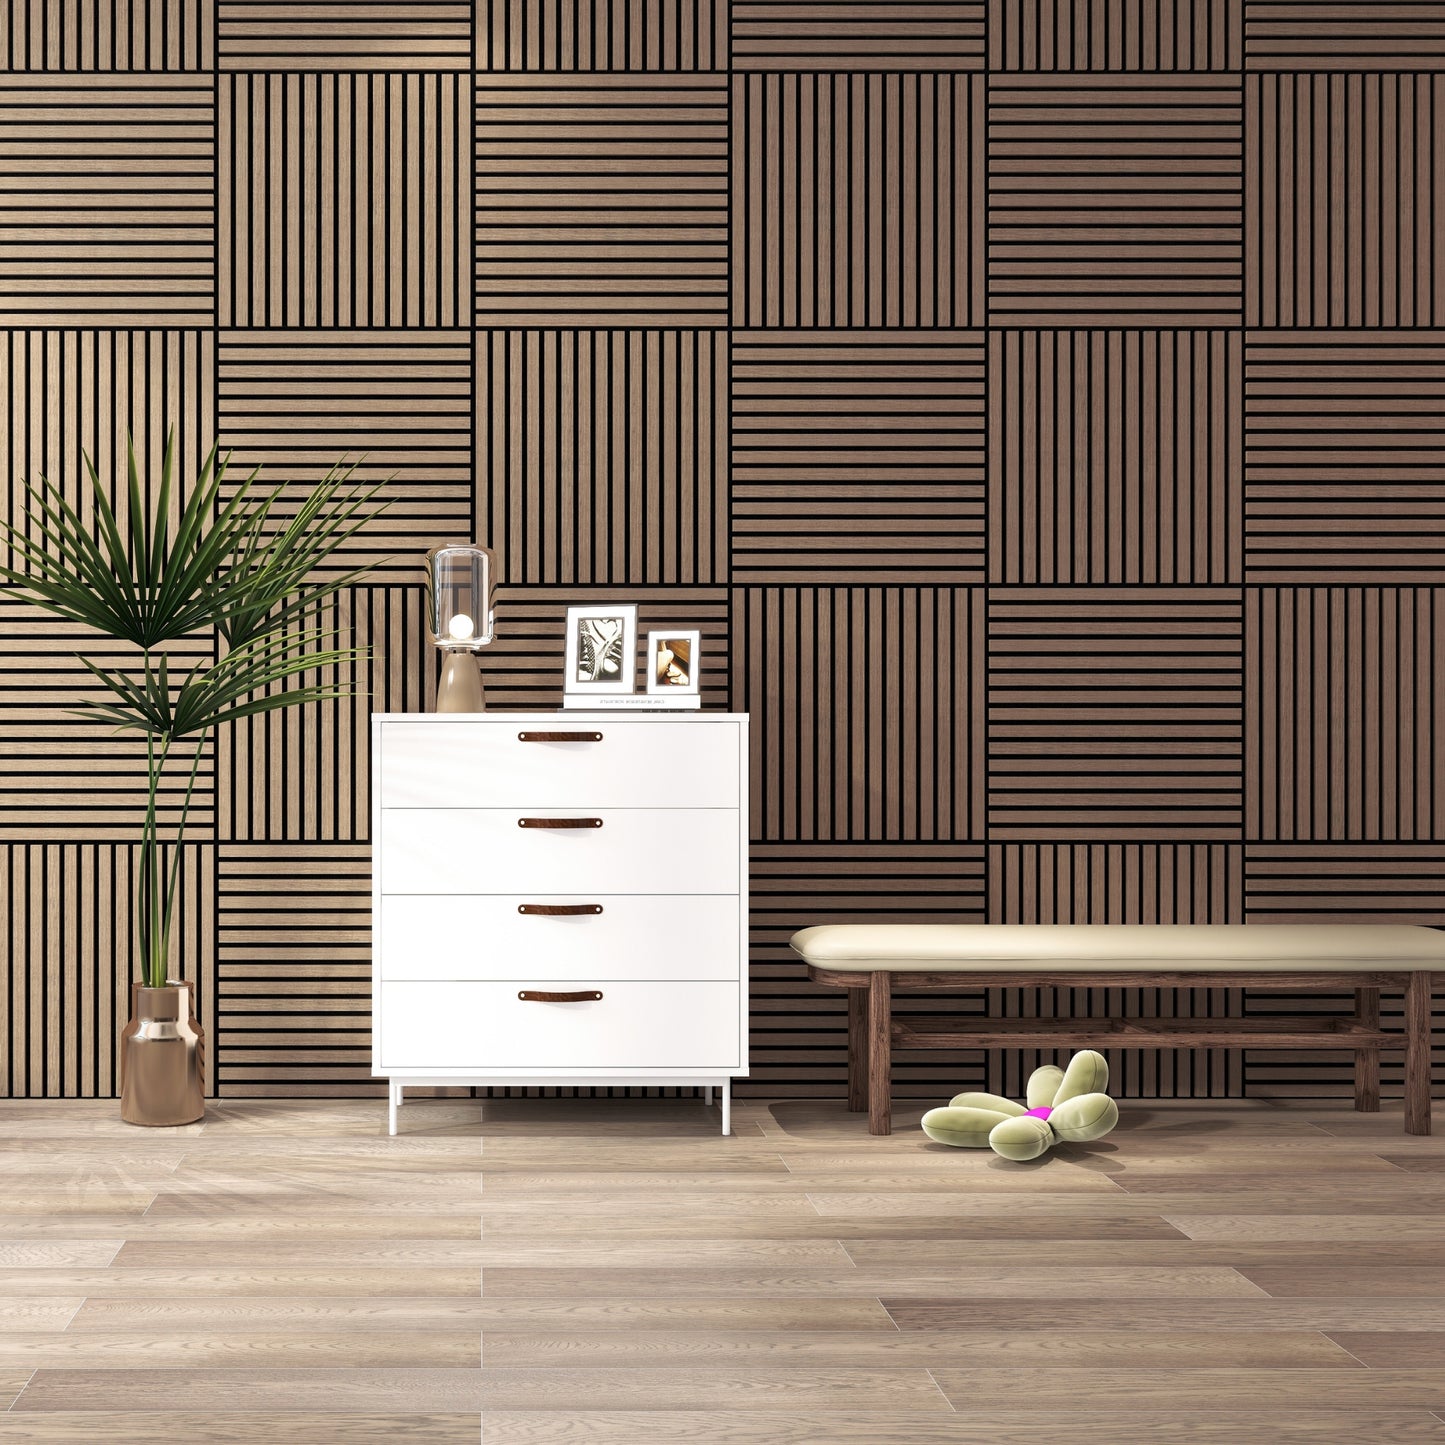 Smoked Oak Acoustic Wood Wall Panel Tiles Series 1 - 60x60cm (4 Pack)